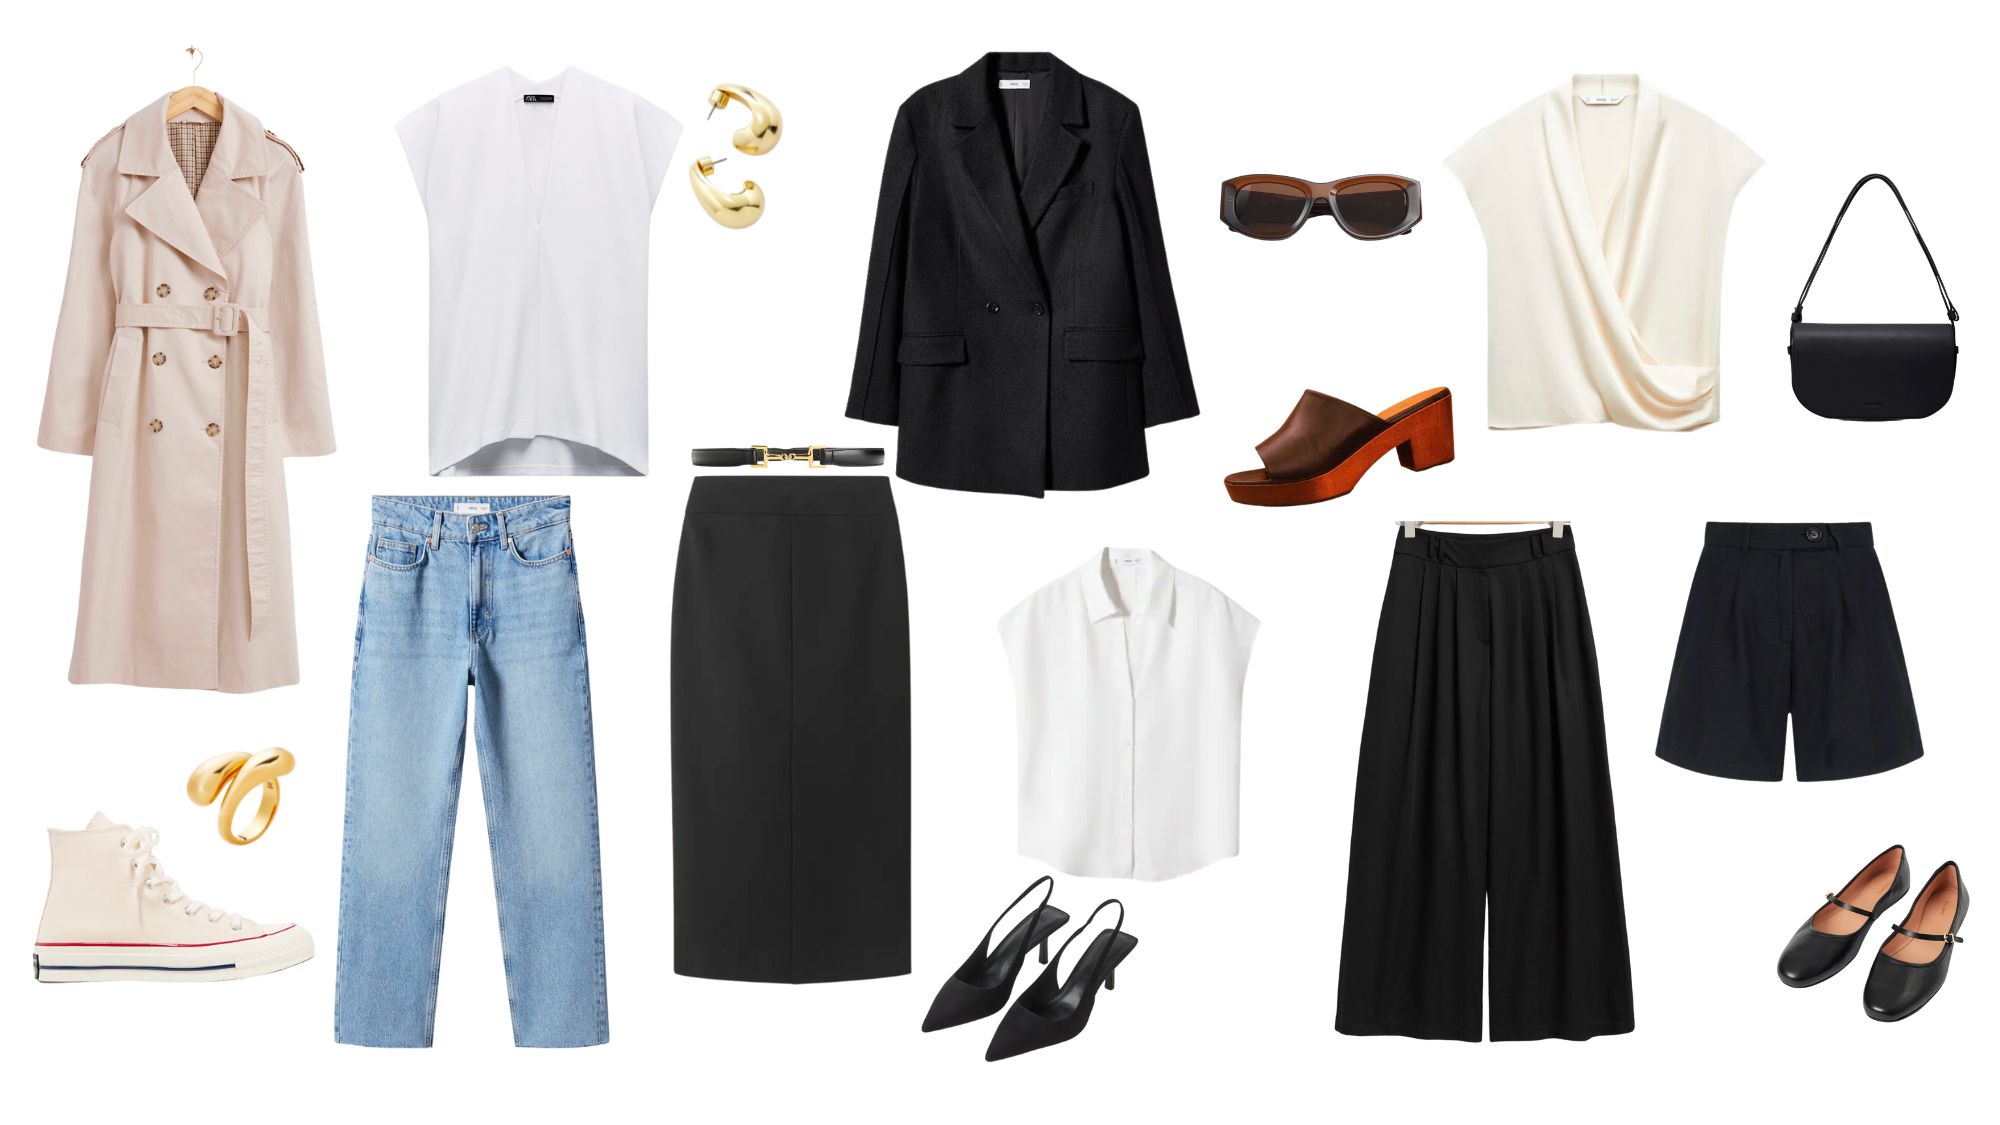 Streamline Wardrobe Decisions with these 3 Simple Shifts